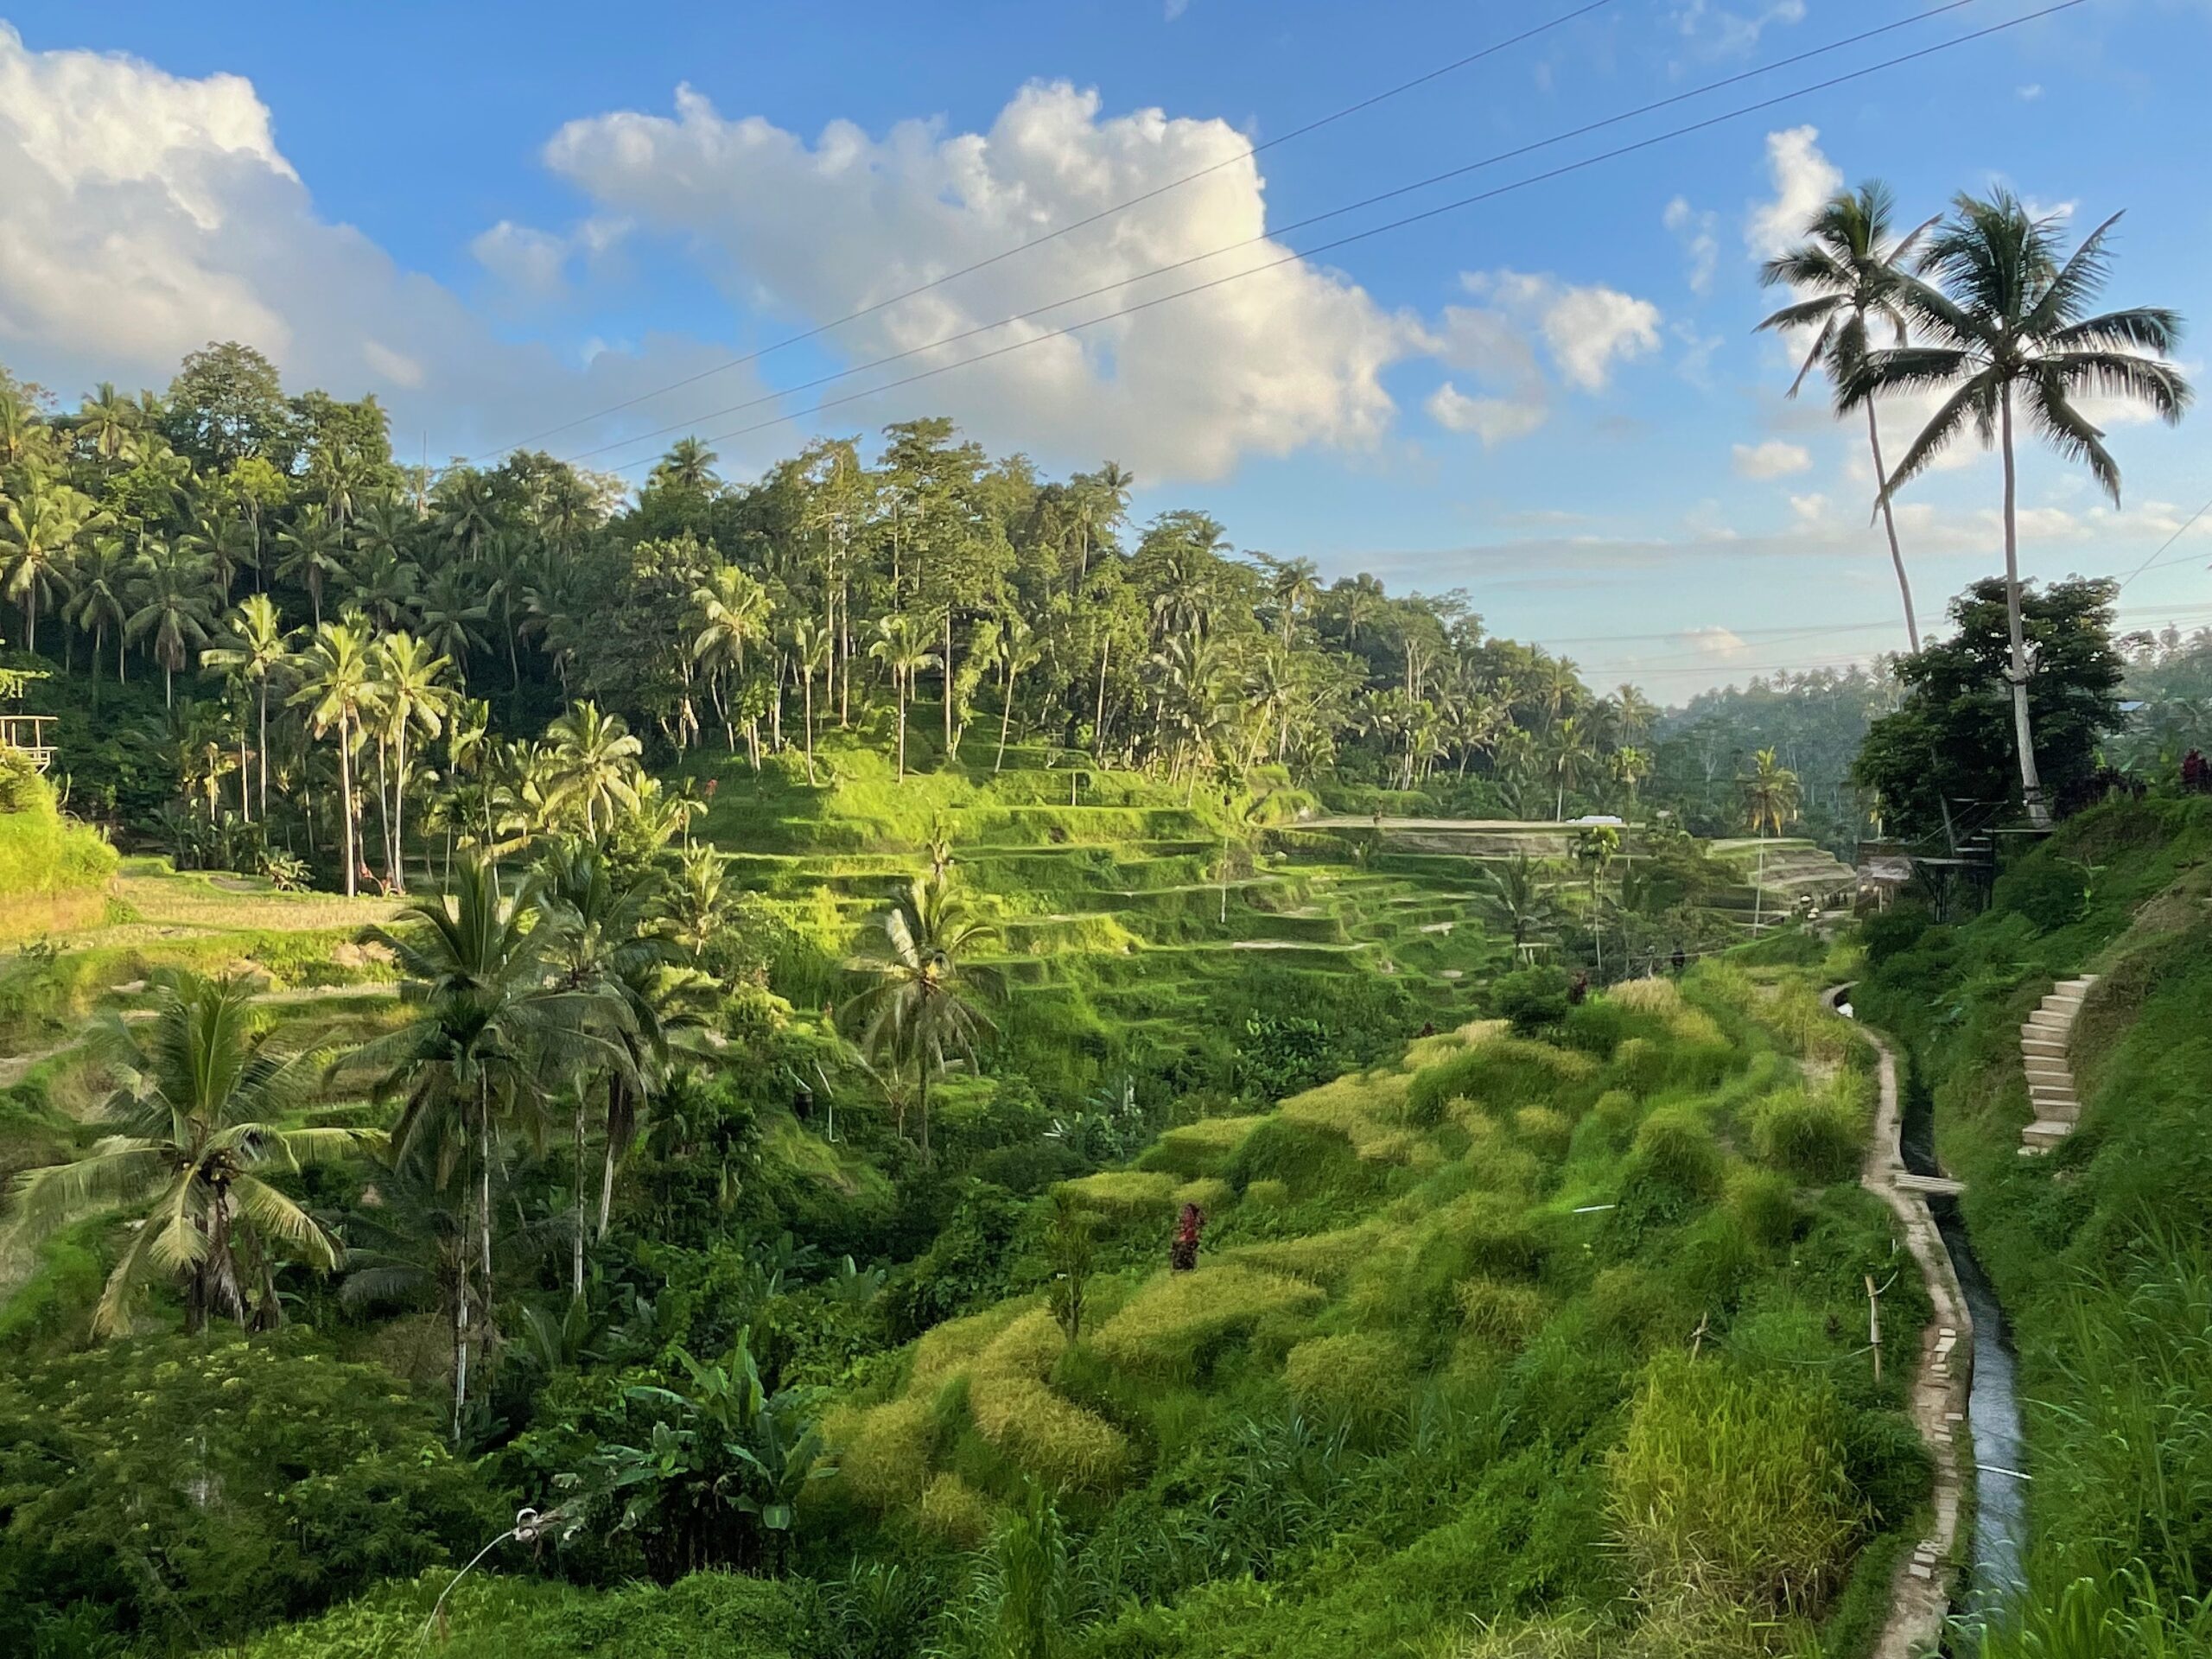 Our Balinese culture-packed itinerary. Things to see and do in Bali.